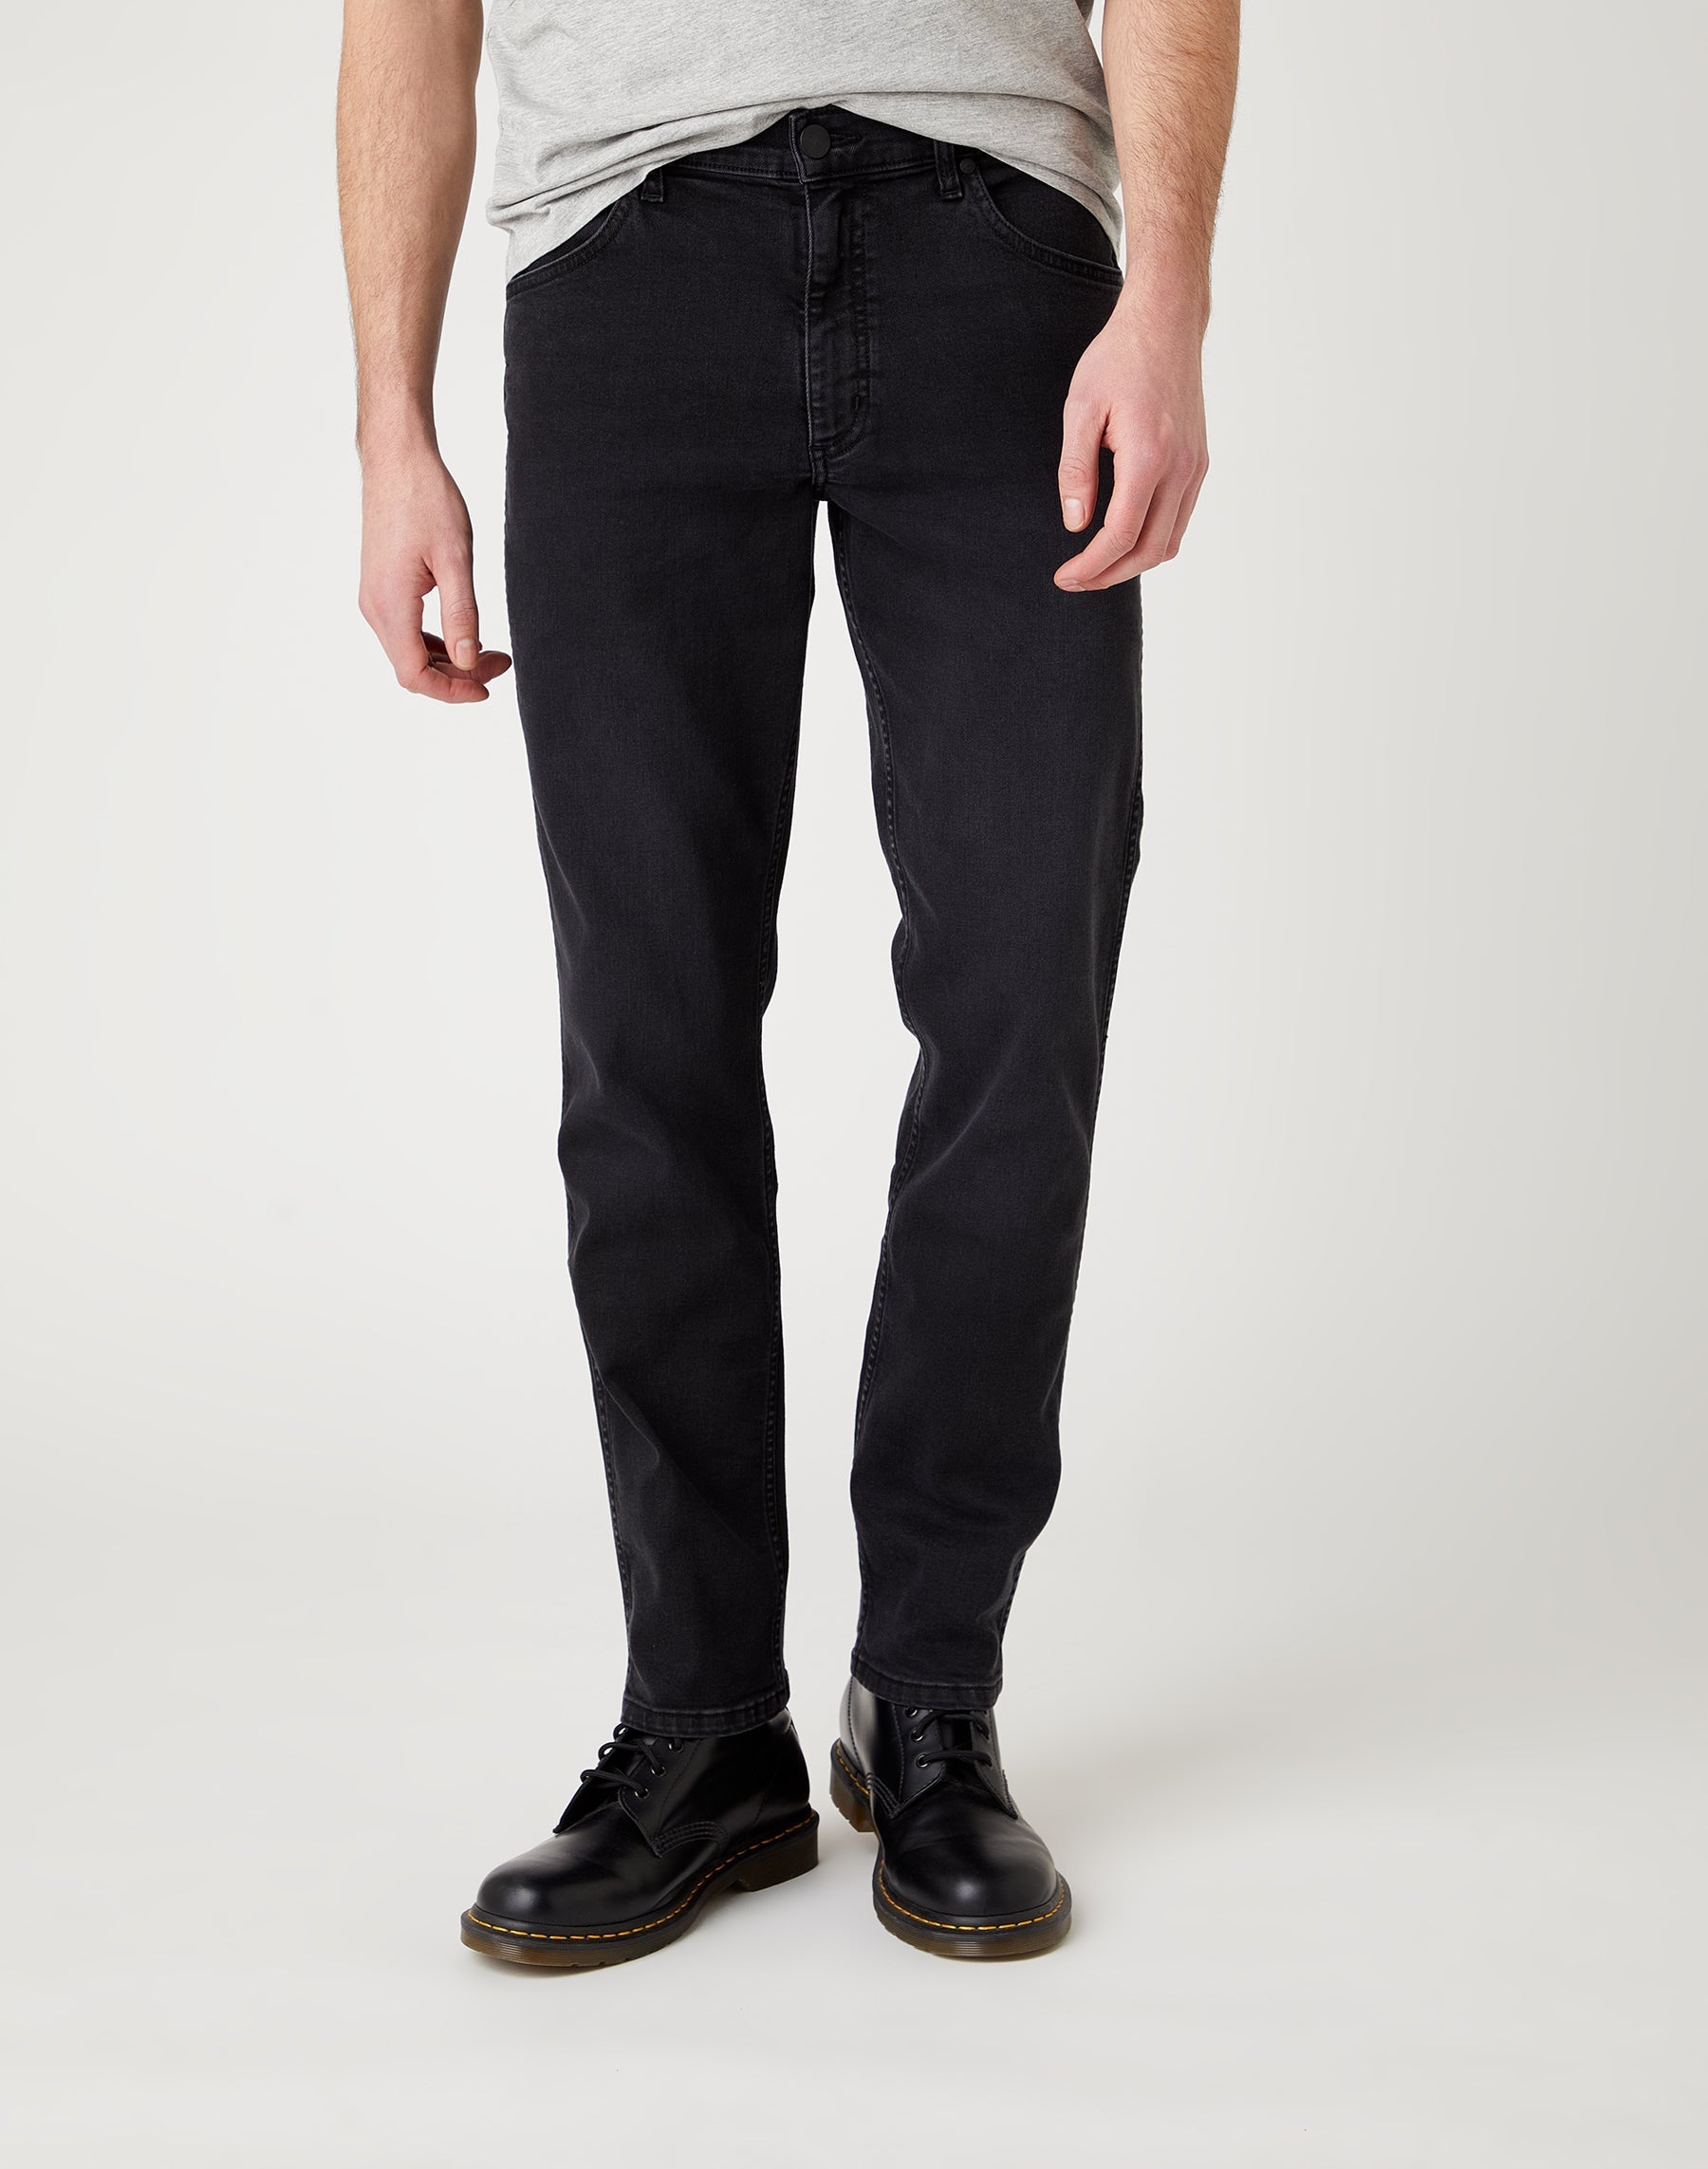 Greensboro High Stretch in Black Crow Jeans Wrangler   